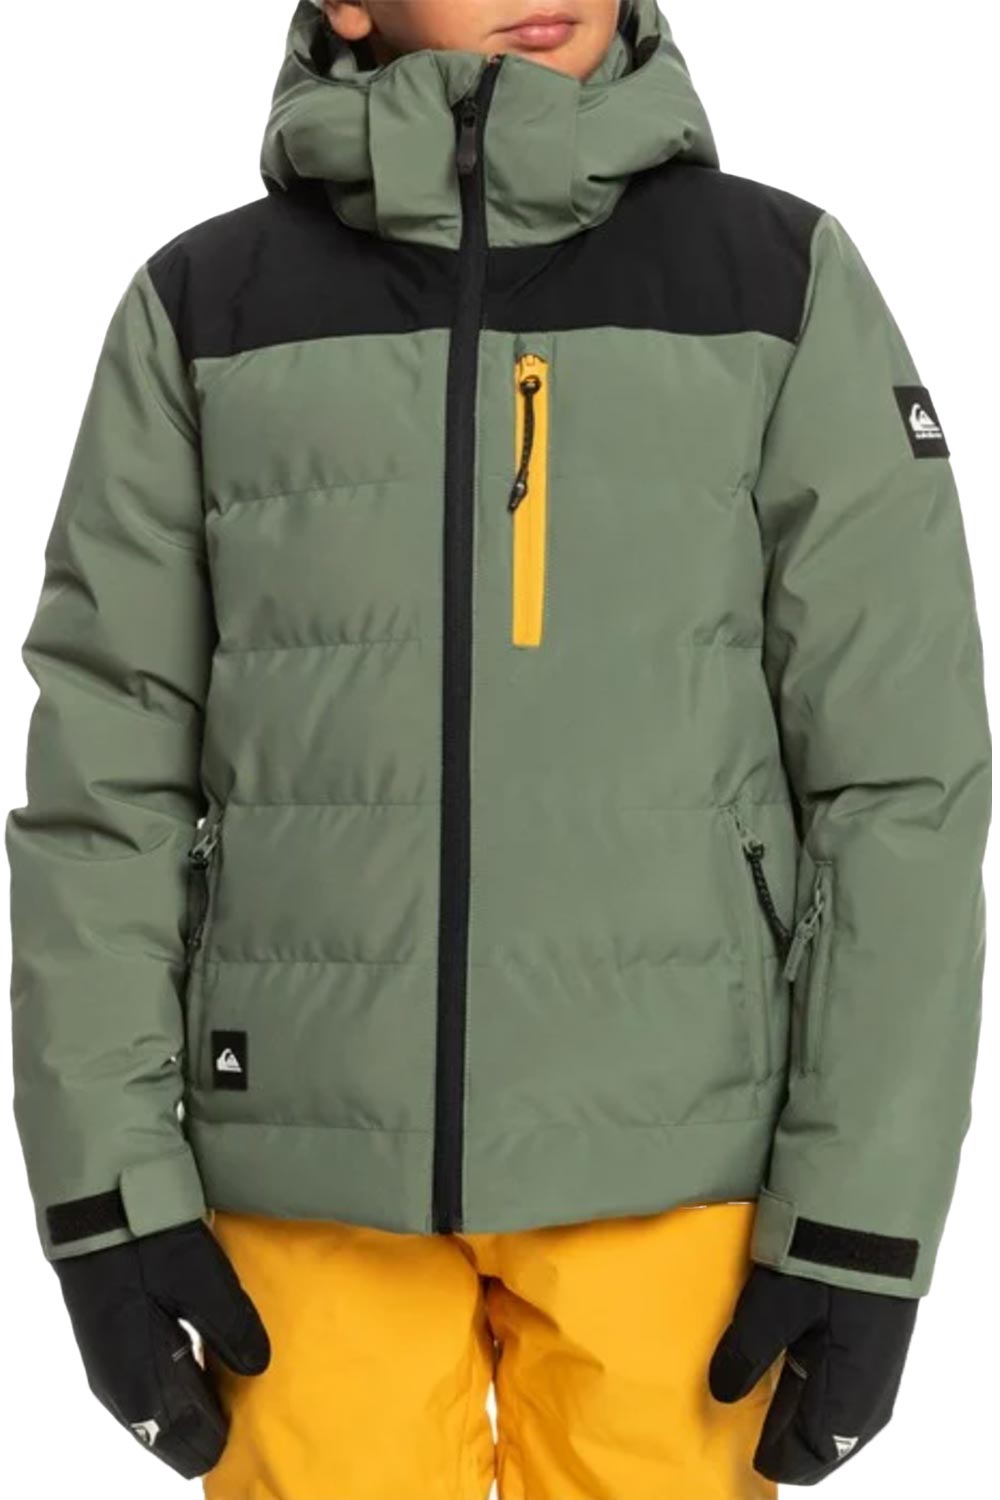 Quiksilver boys' snowboard puffy jacket, green with back and yellow accents